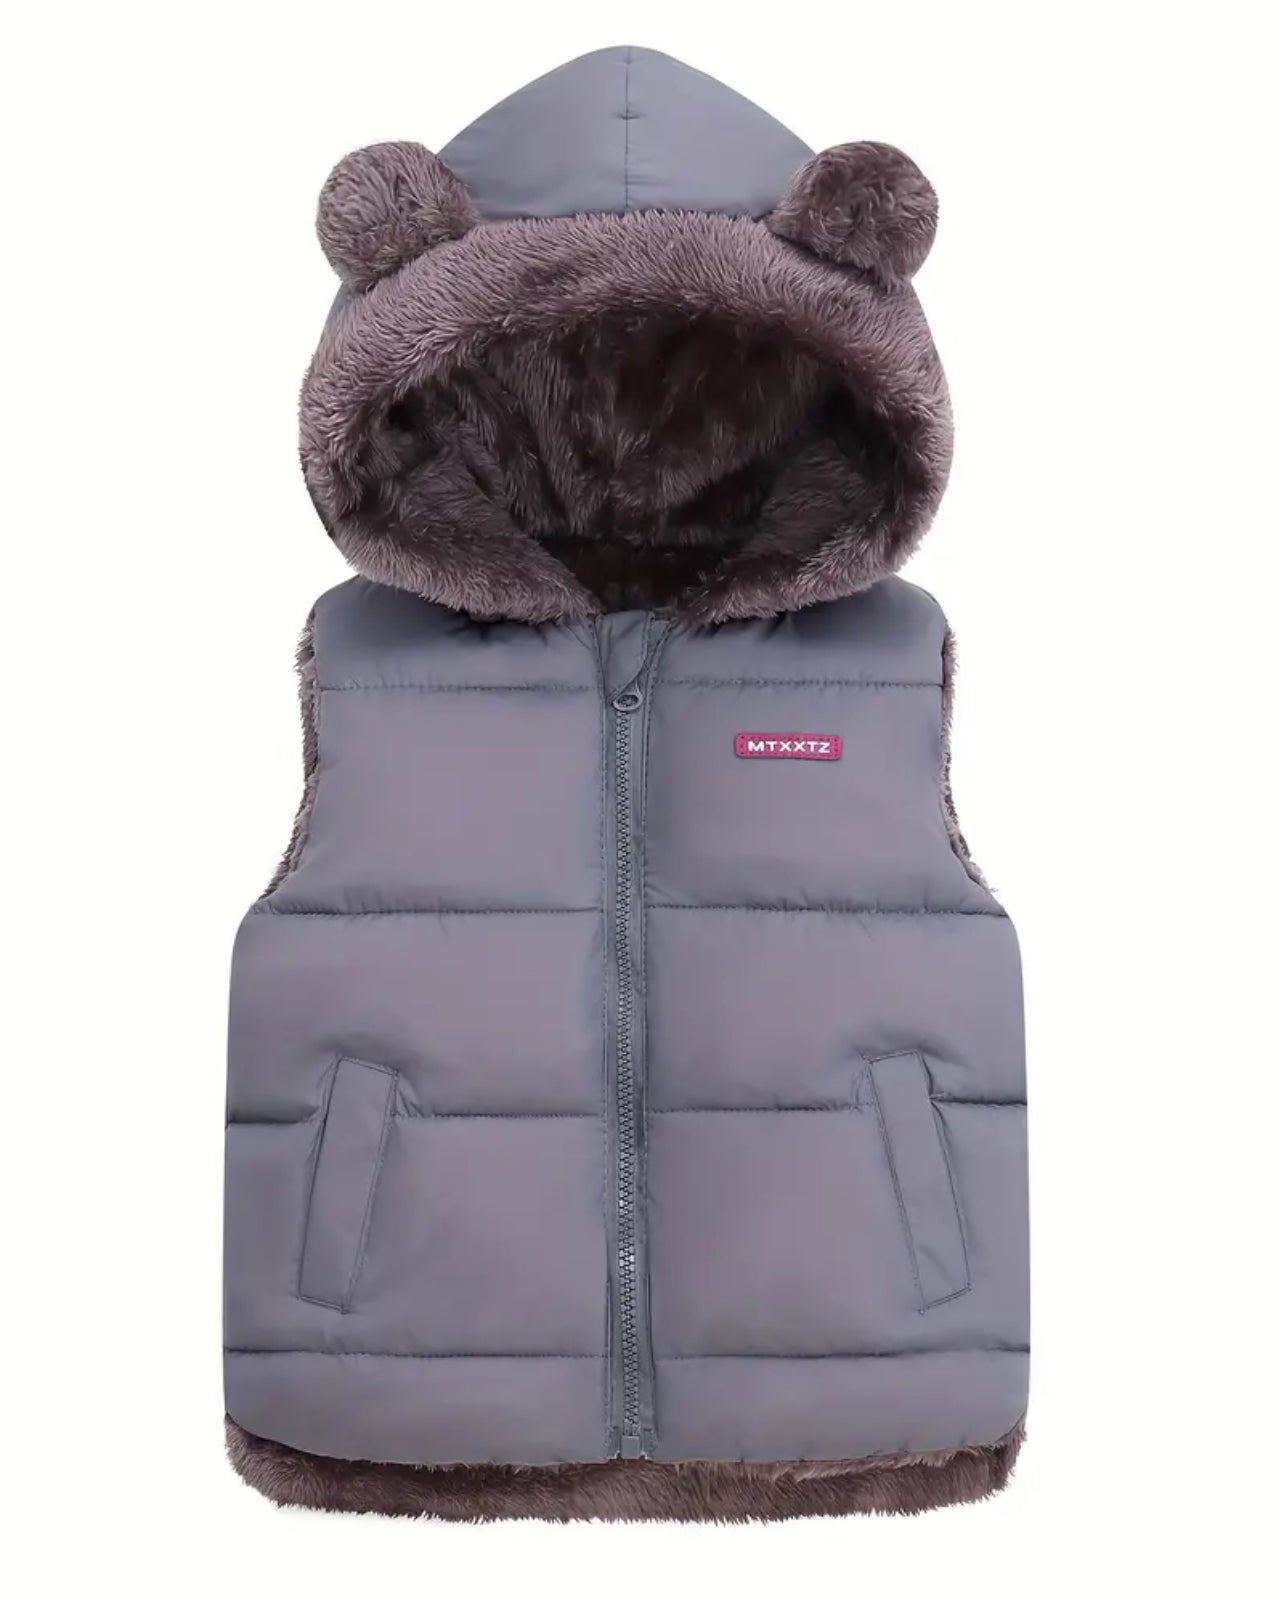 Cute Ears Hooded Vest Coat, Thick Plush Lined Sleeveless Casual Padded For Winter